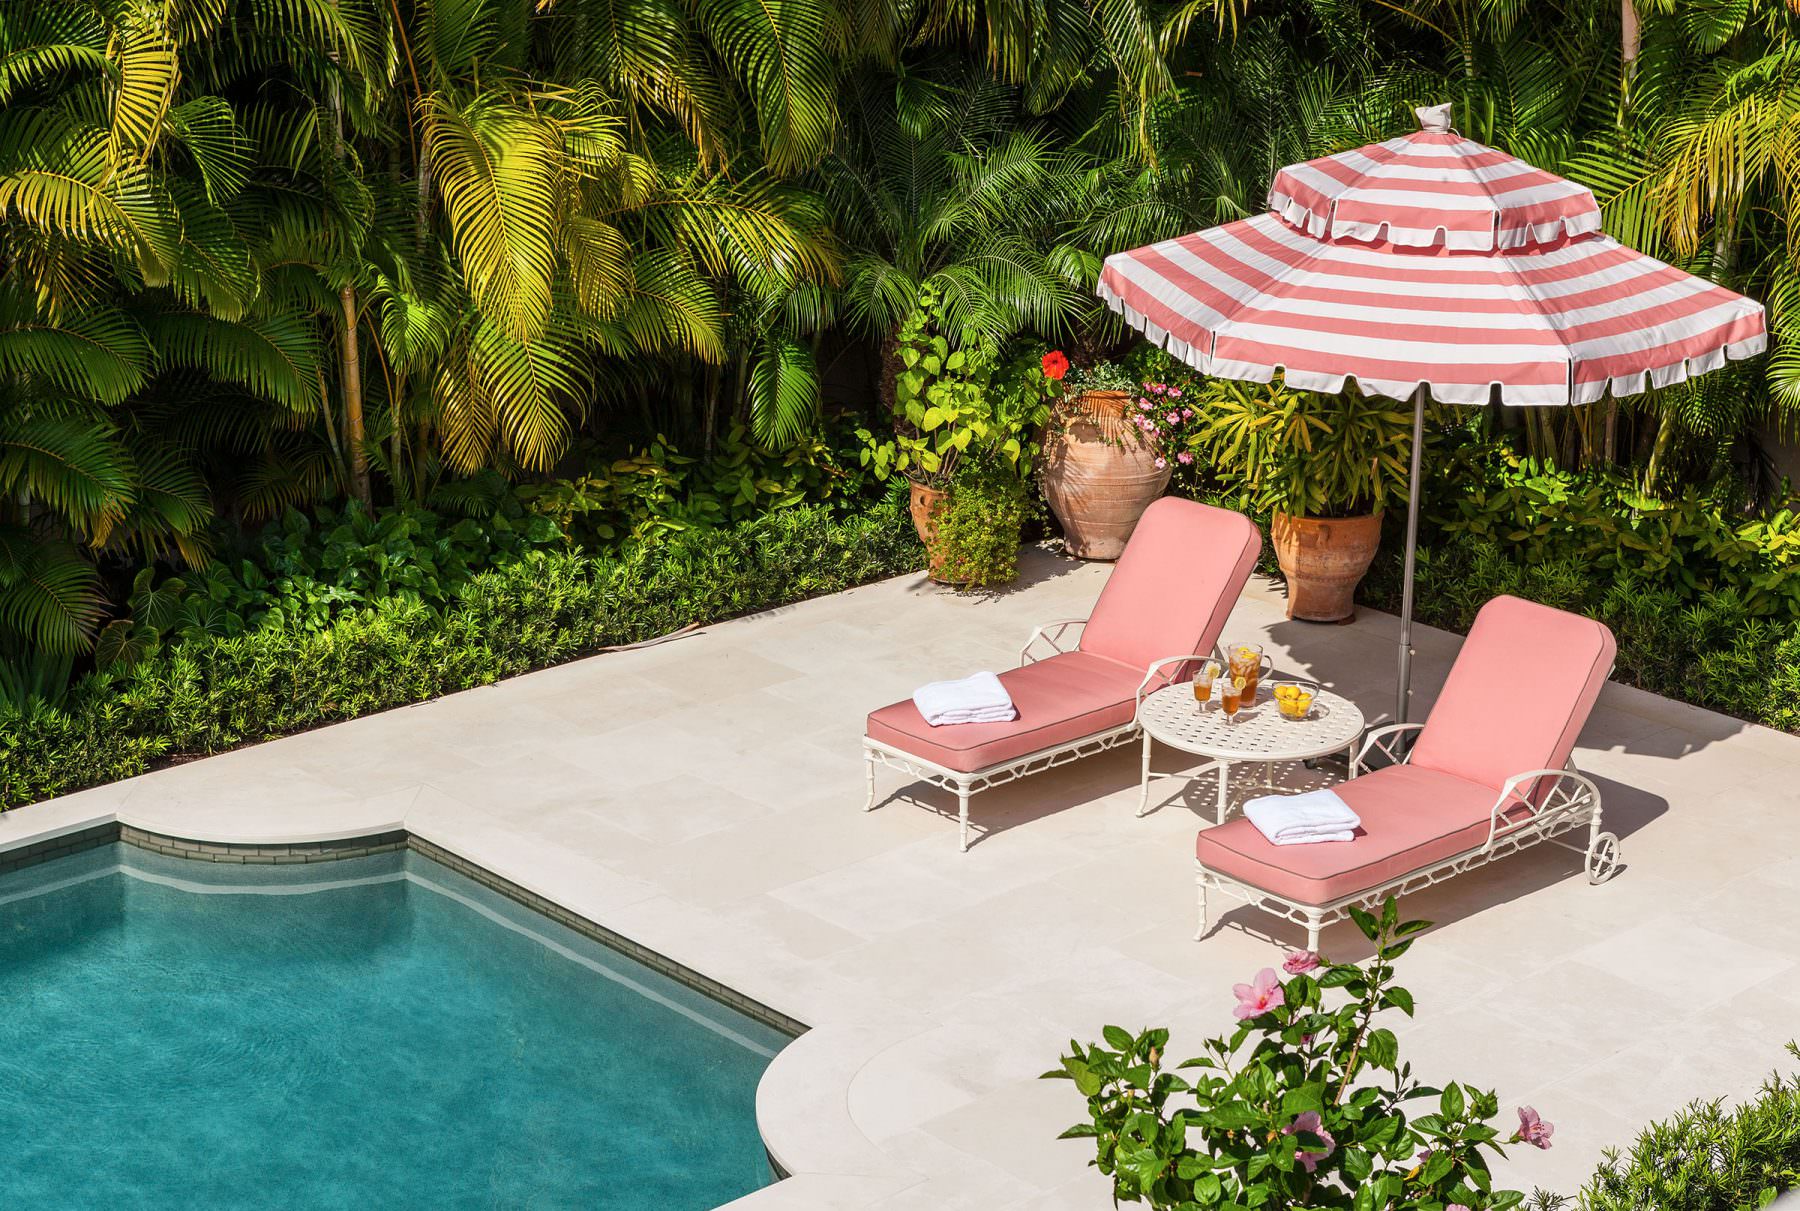 Image of crystal blue pool with pink lounge chairs and striped pink and white umbrella.